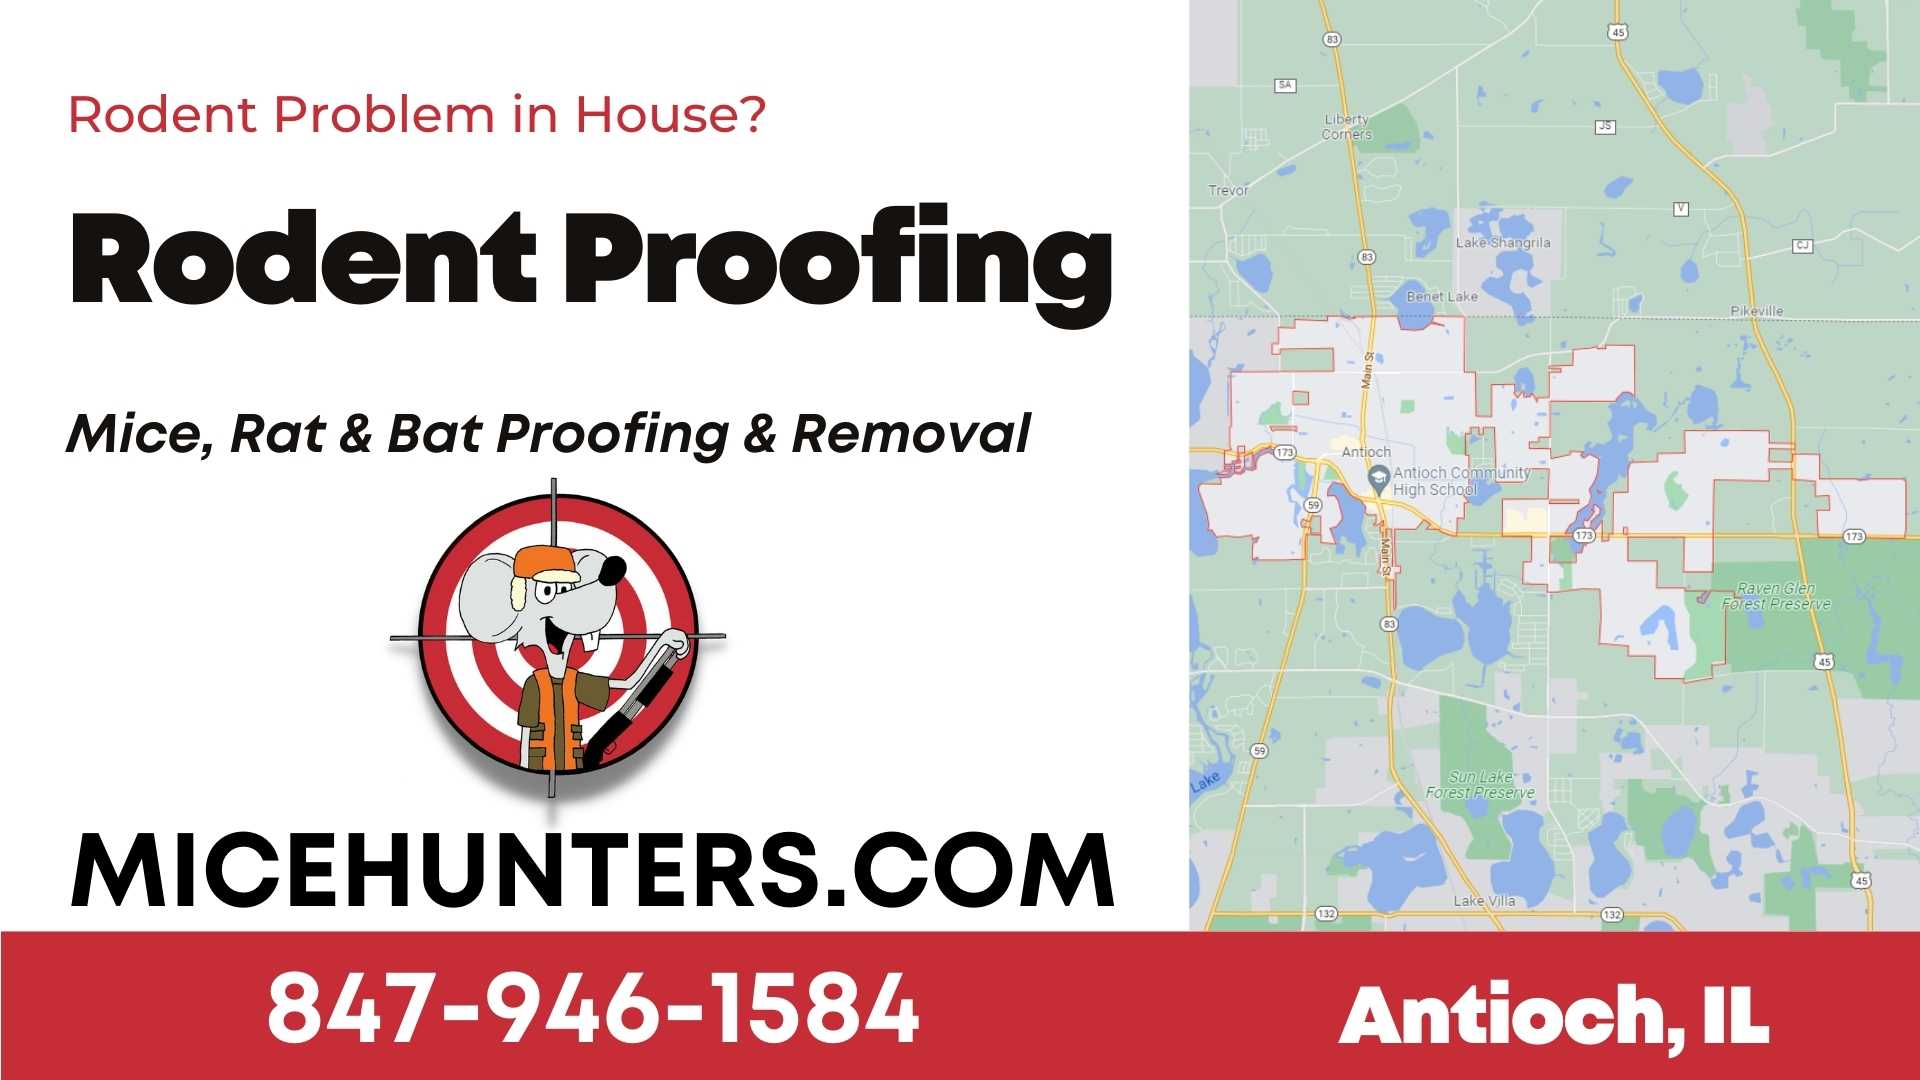 Antioch Rodent and Mice Proofing Exterminator near me